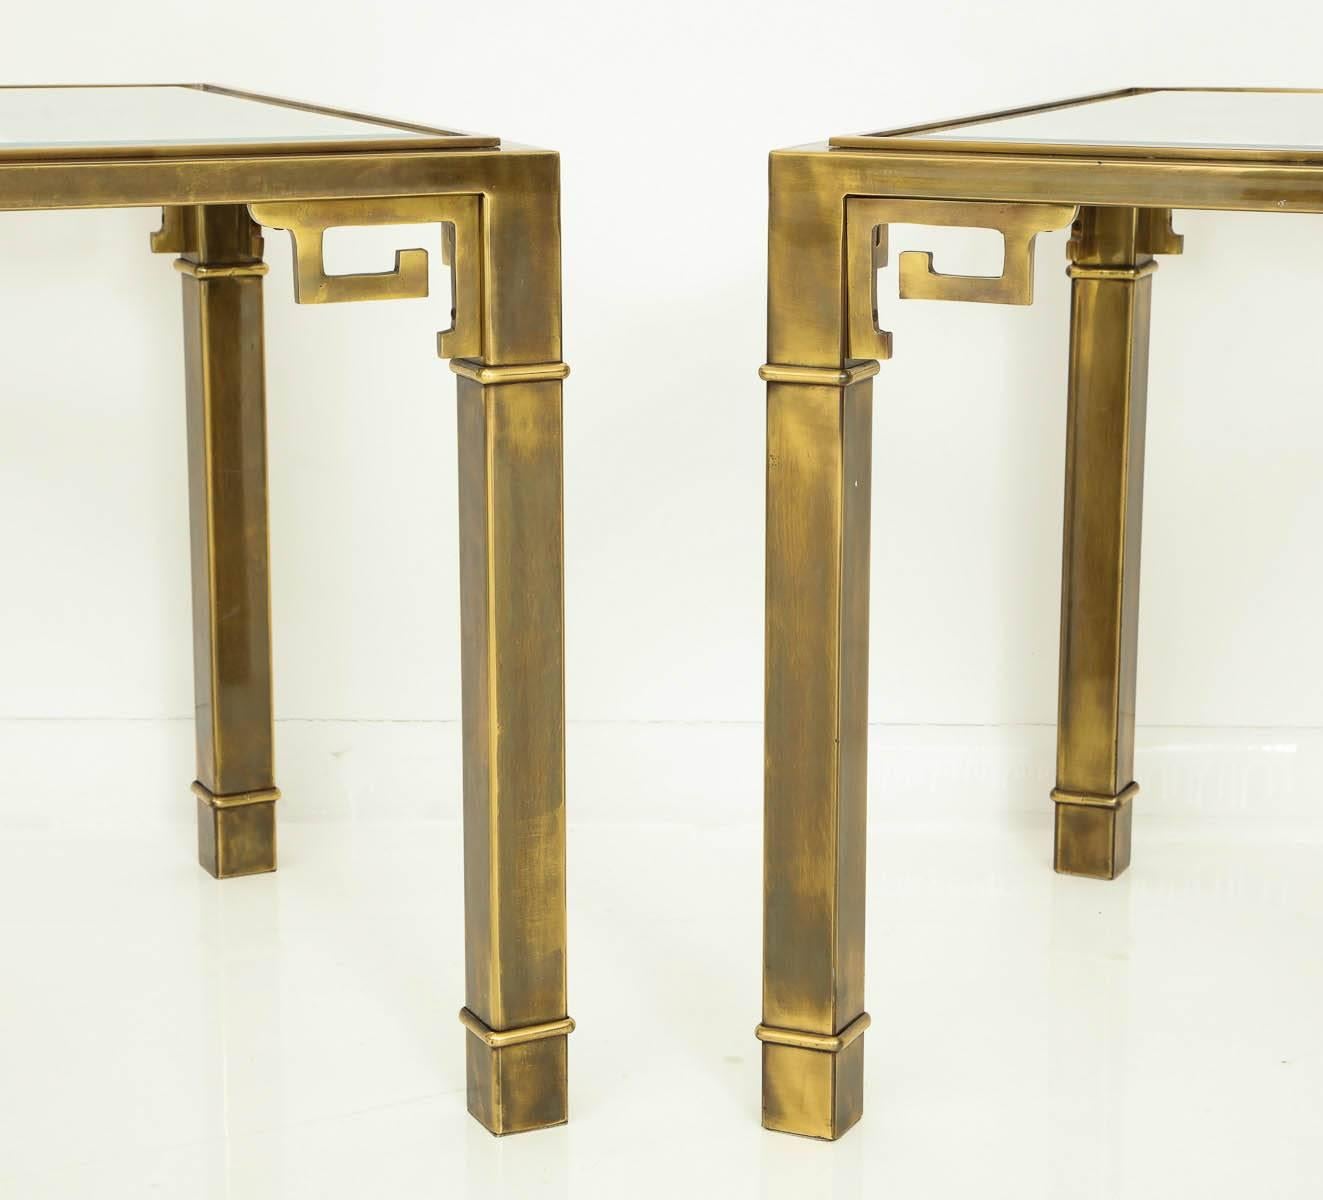 Pair of elegant brass side tables by Mastercraft.
The tables have Greek key detailing to the corners and have 1/4" inset glass tops.